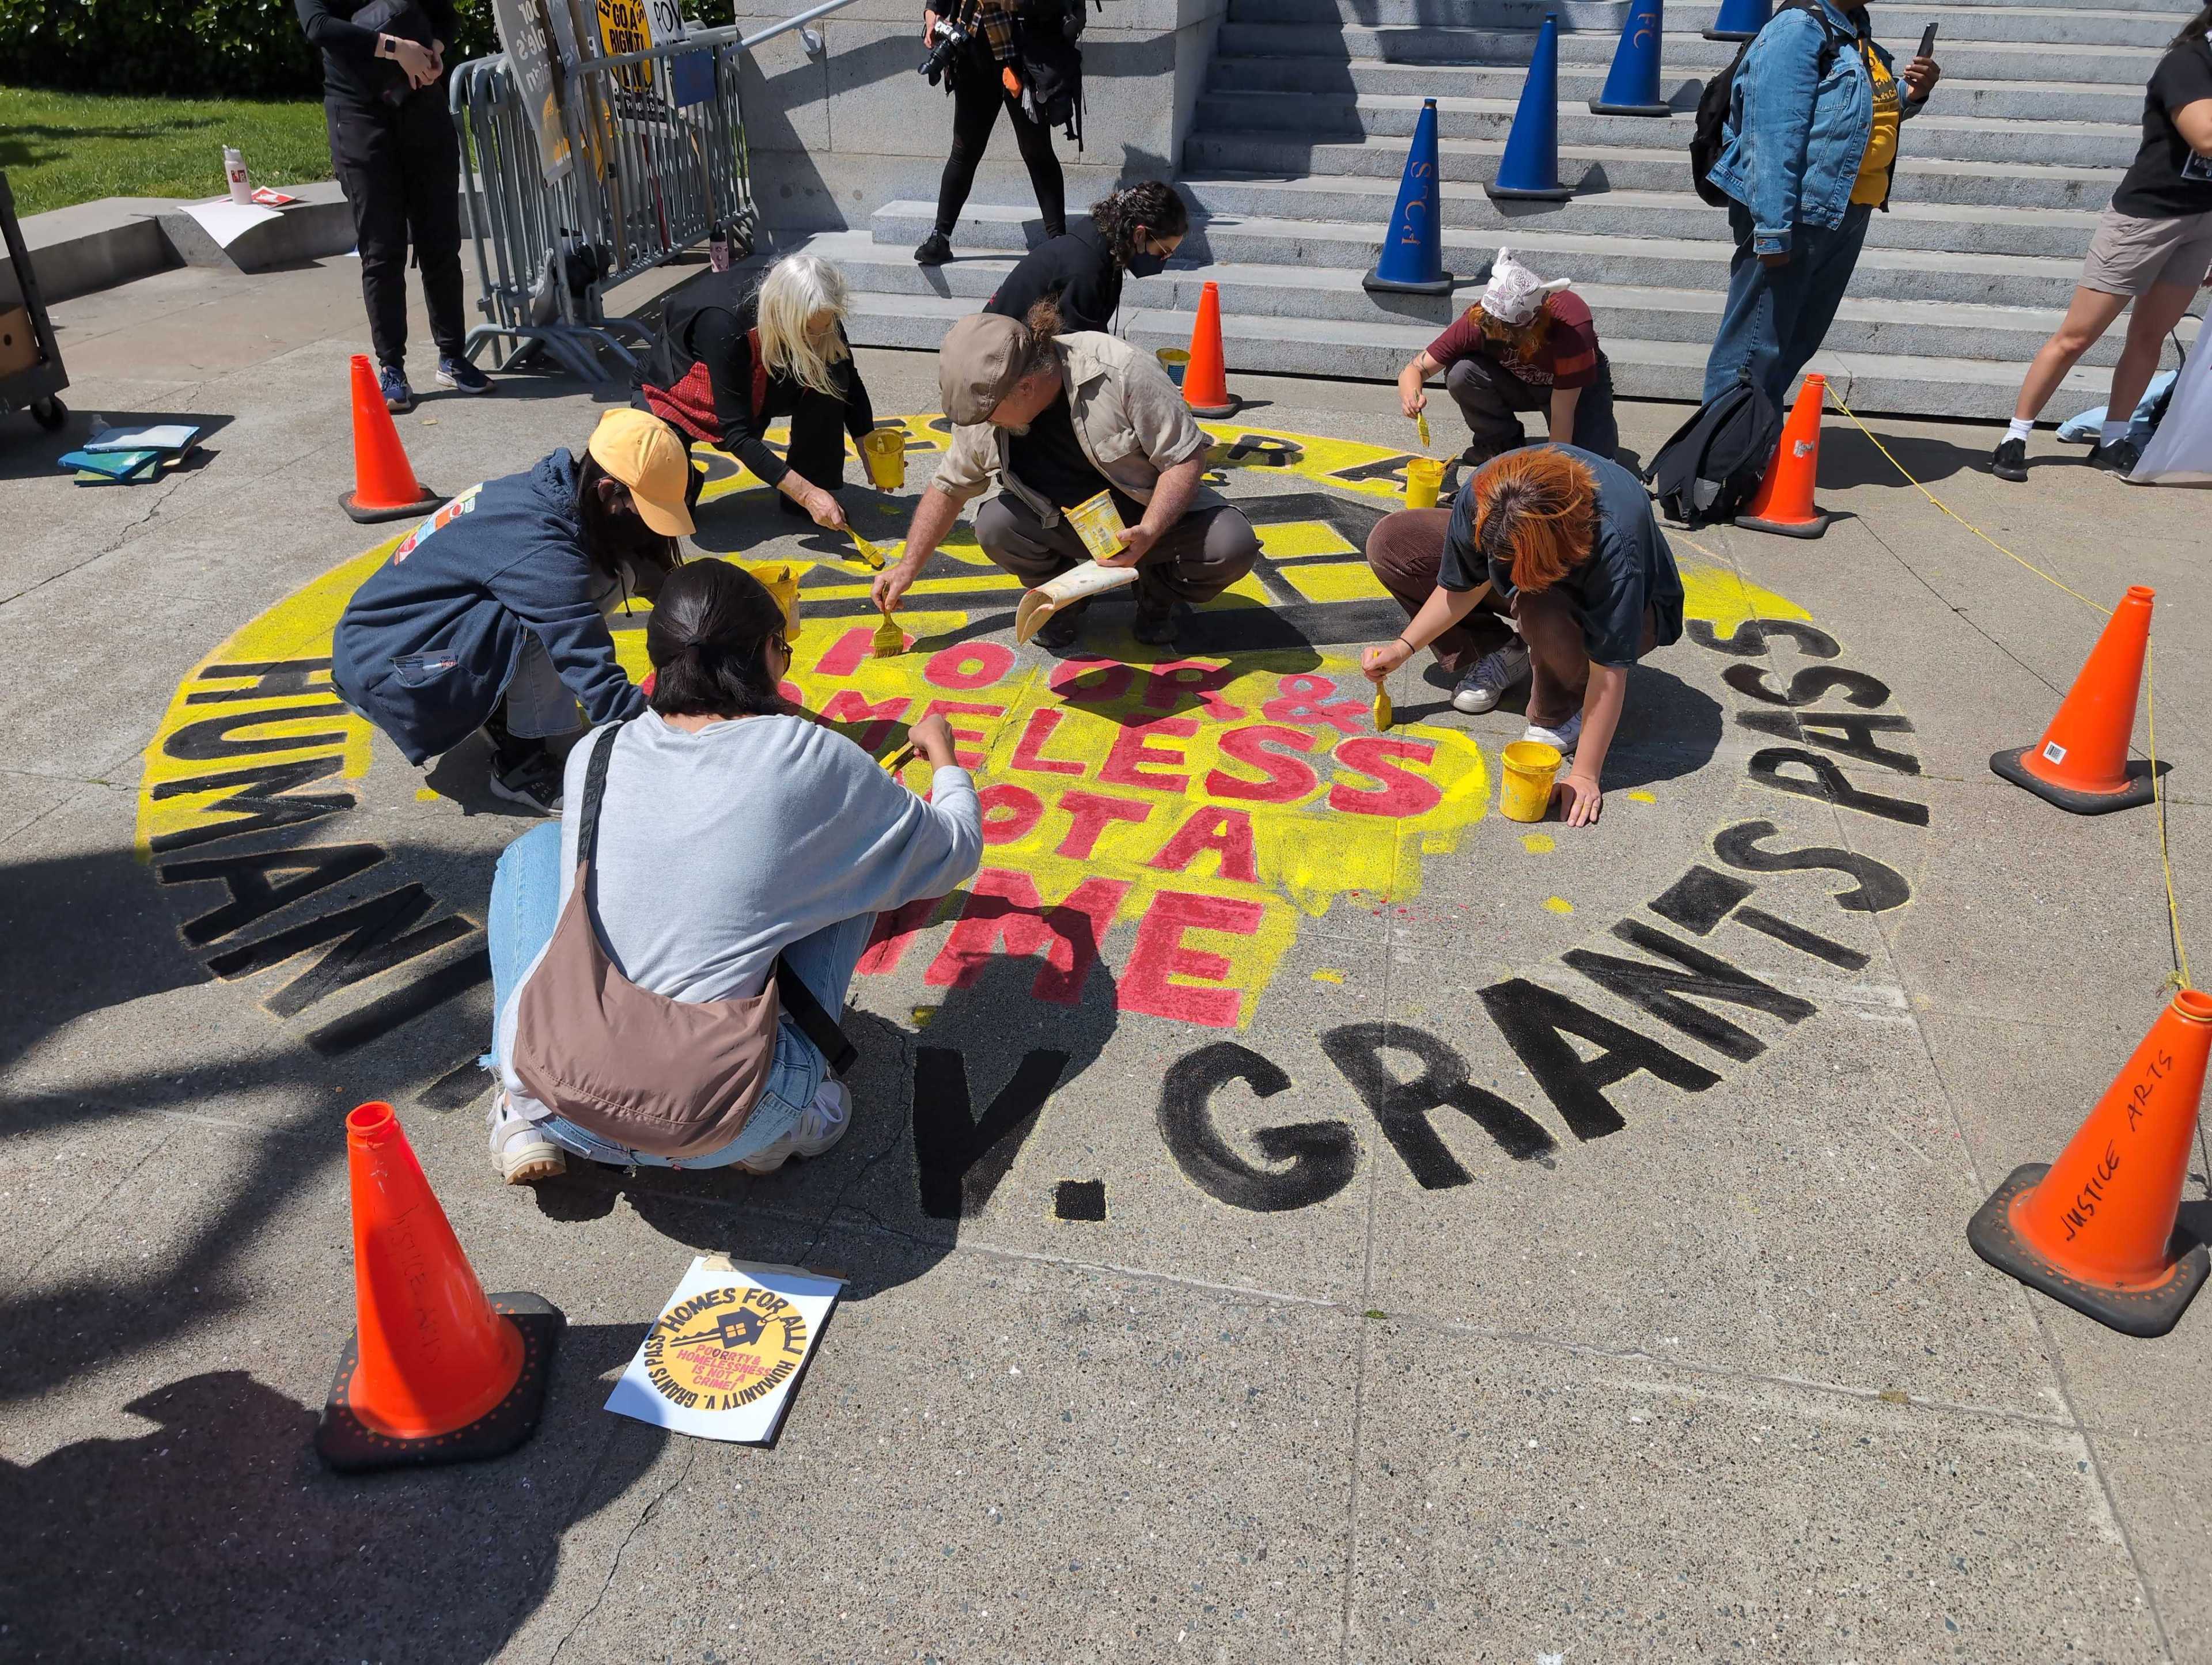 People are painting a circular street mural with the words &quot;HUMANITY NOT VANITY, SAN FRANCISCO SAYS PAST ACTS MATTER&quot; surrounded by traffic cones.